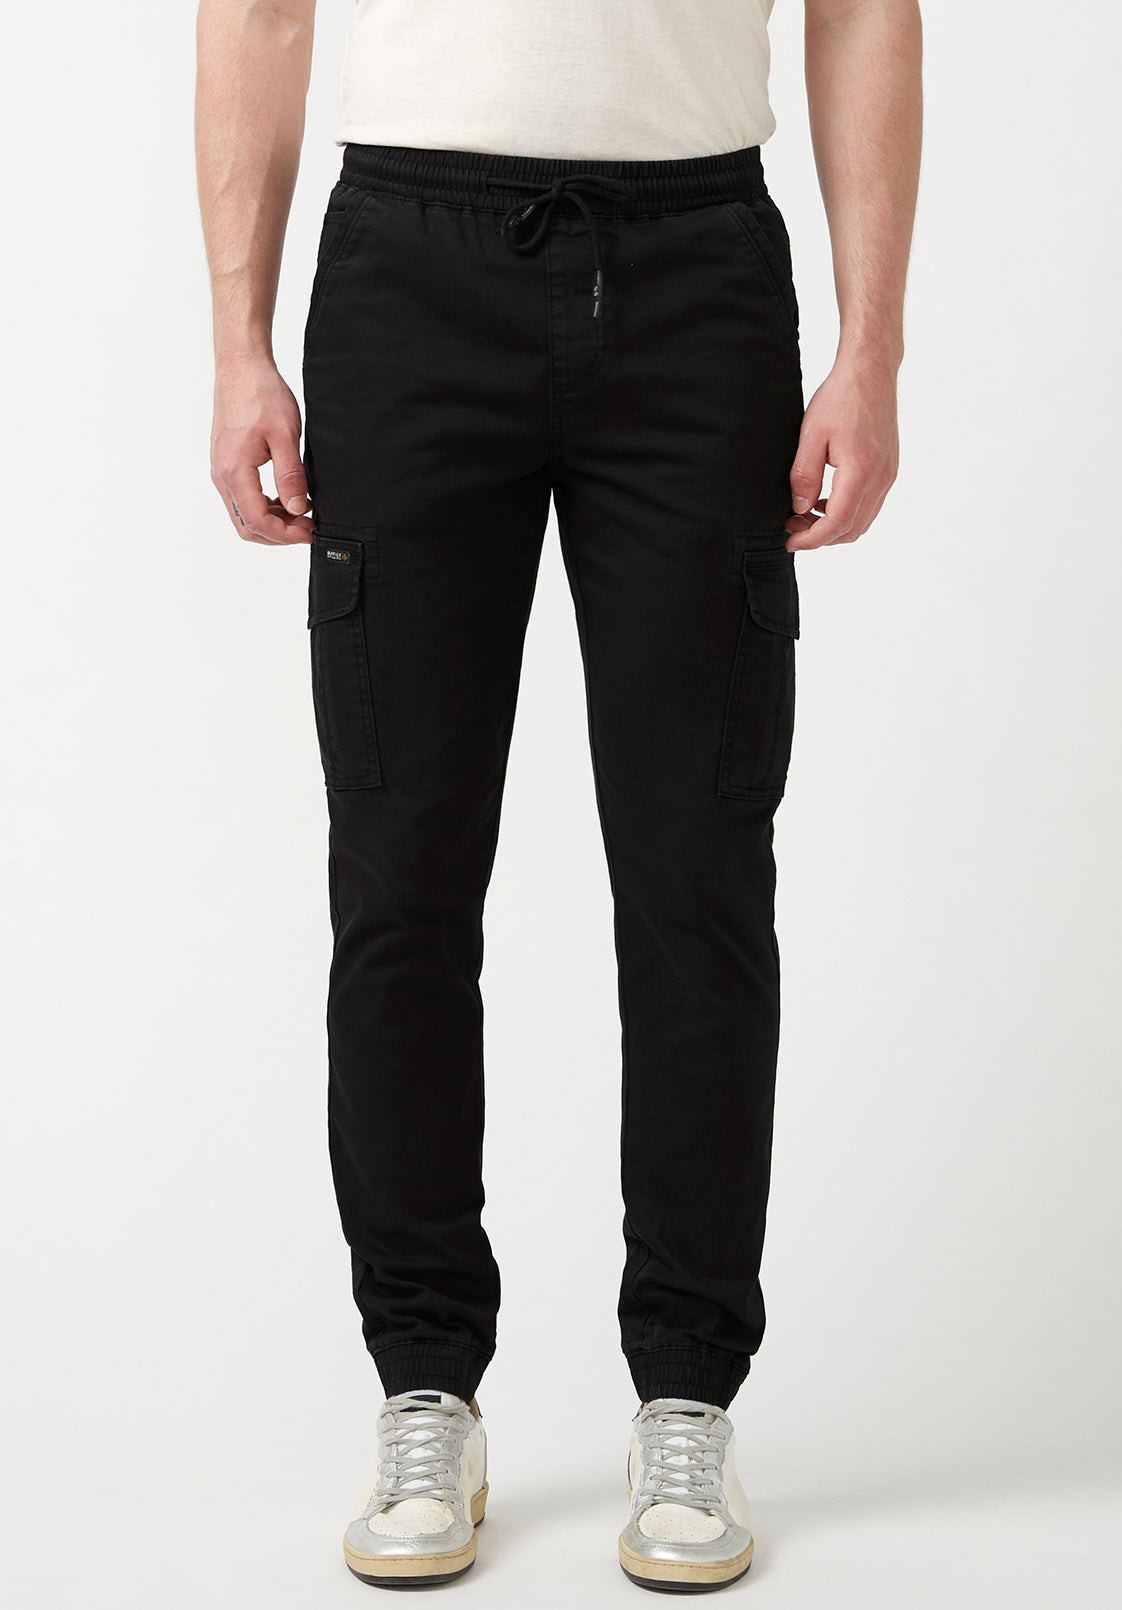 Men's Utility Tapered Jogger Pants - All in Motion Black L